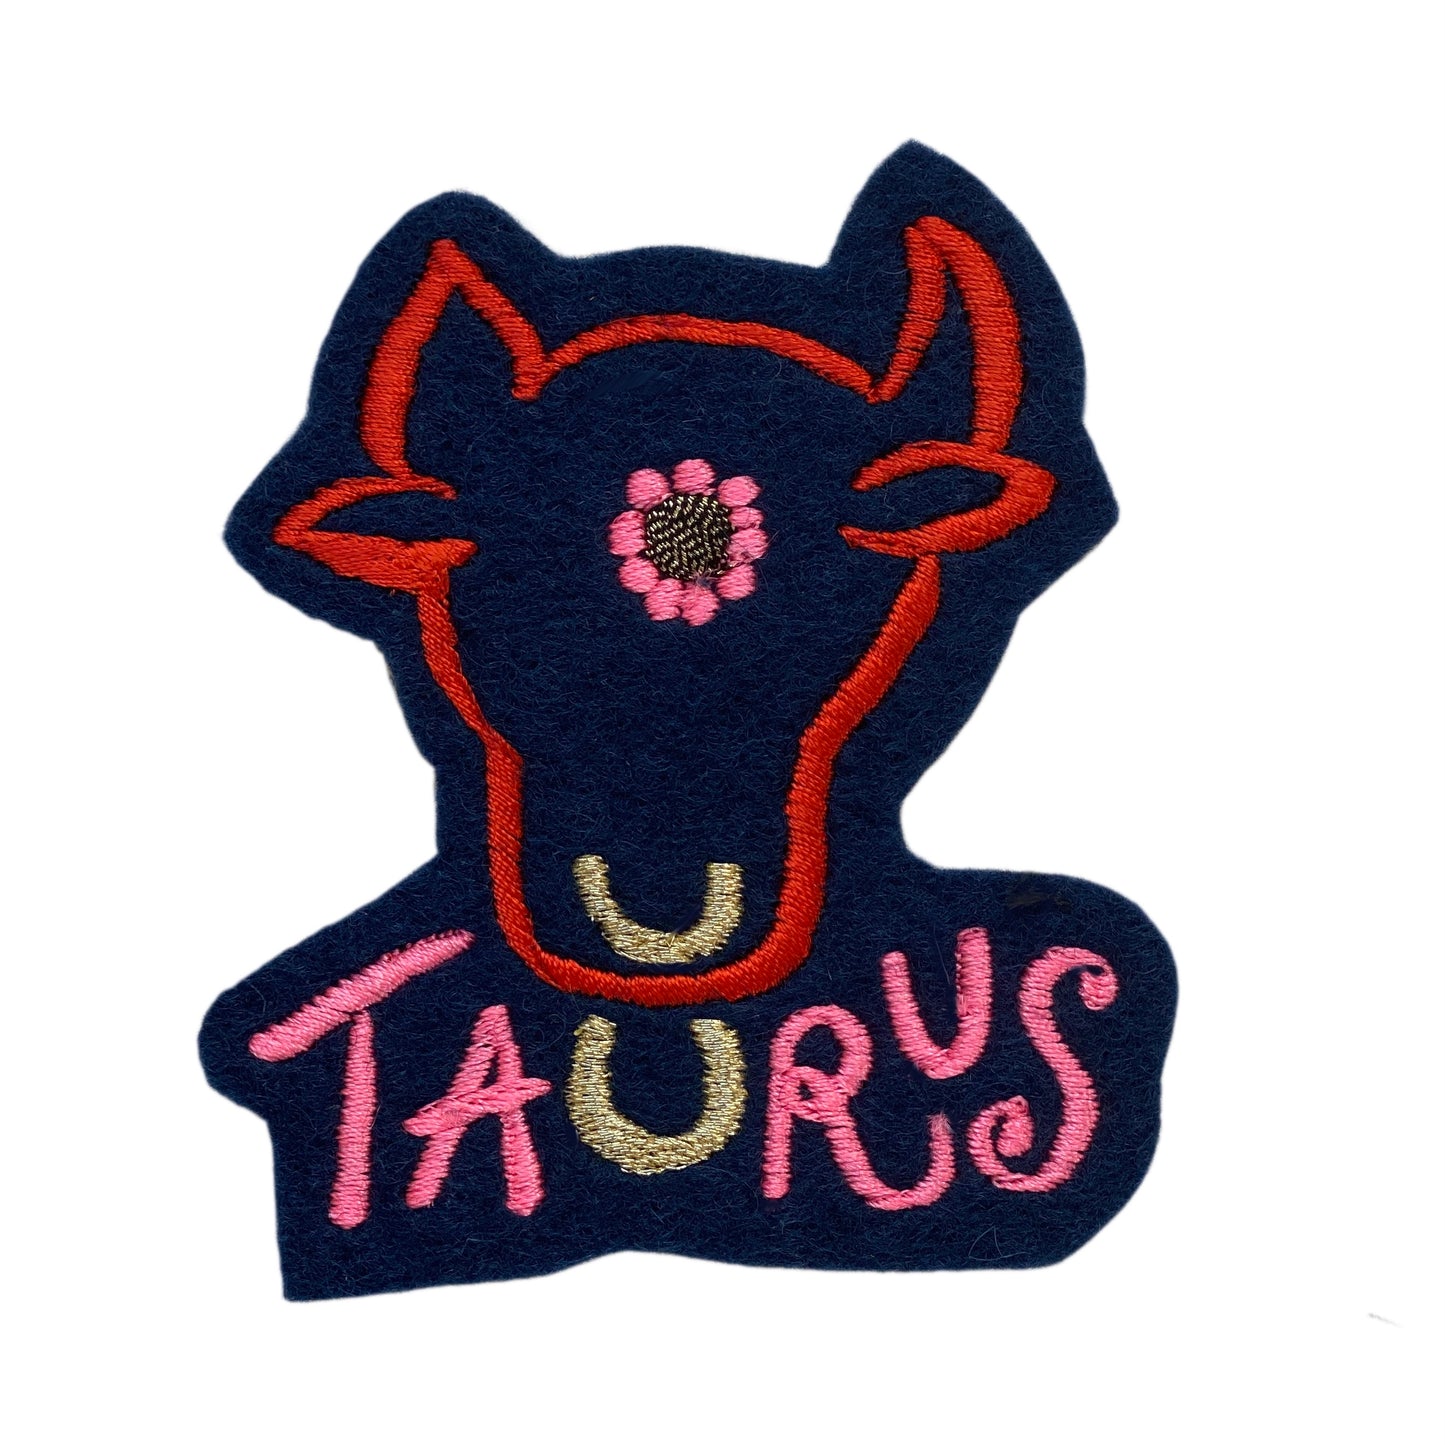 Taurus embroidered patch on white background